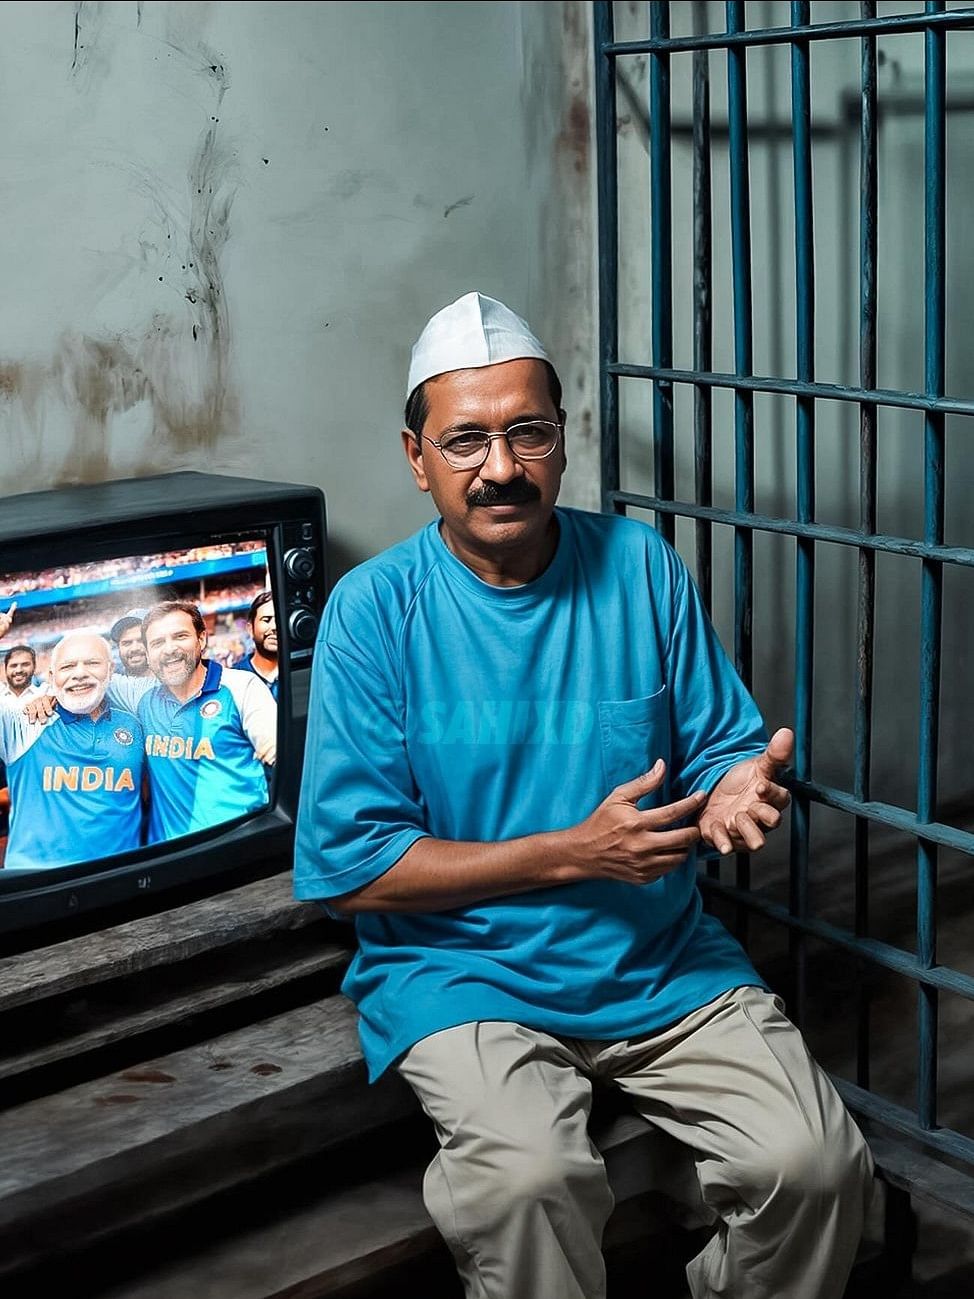 The artist also reimagined AAP supremo Kejriwal enjoying the match from the jail.